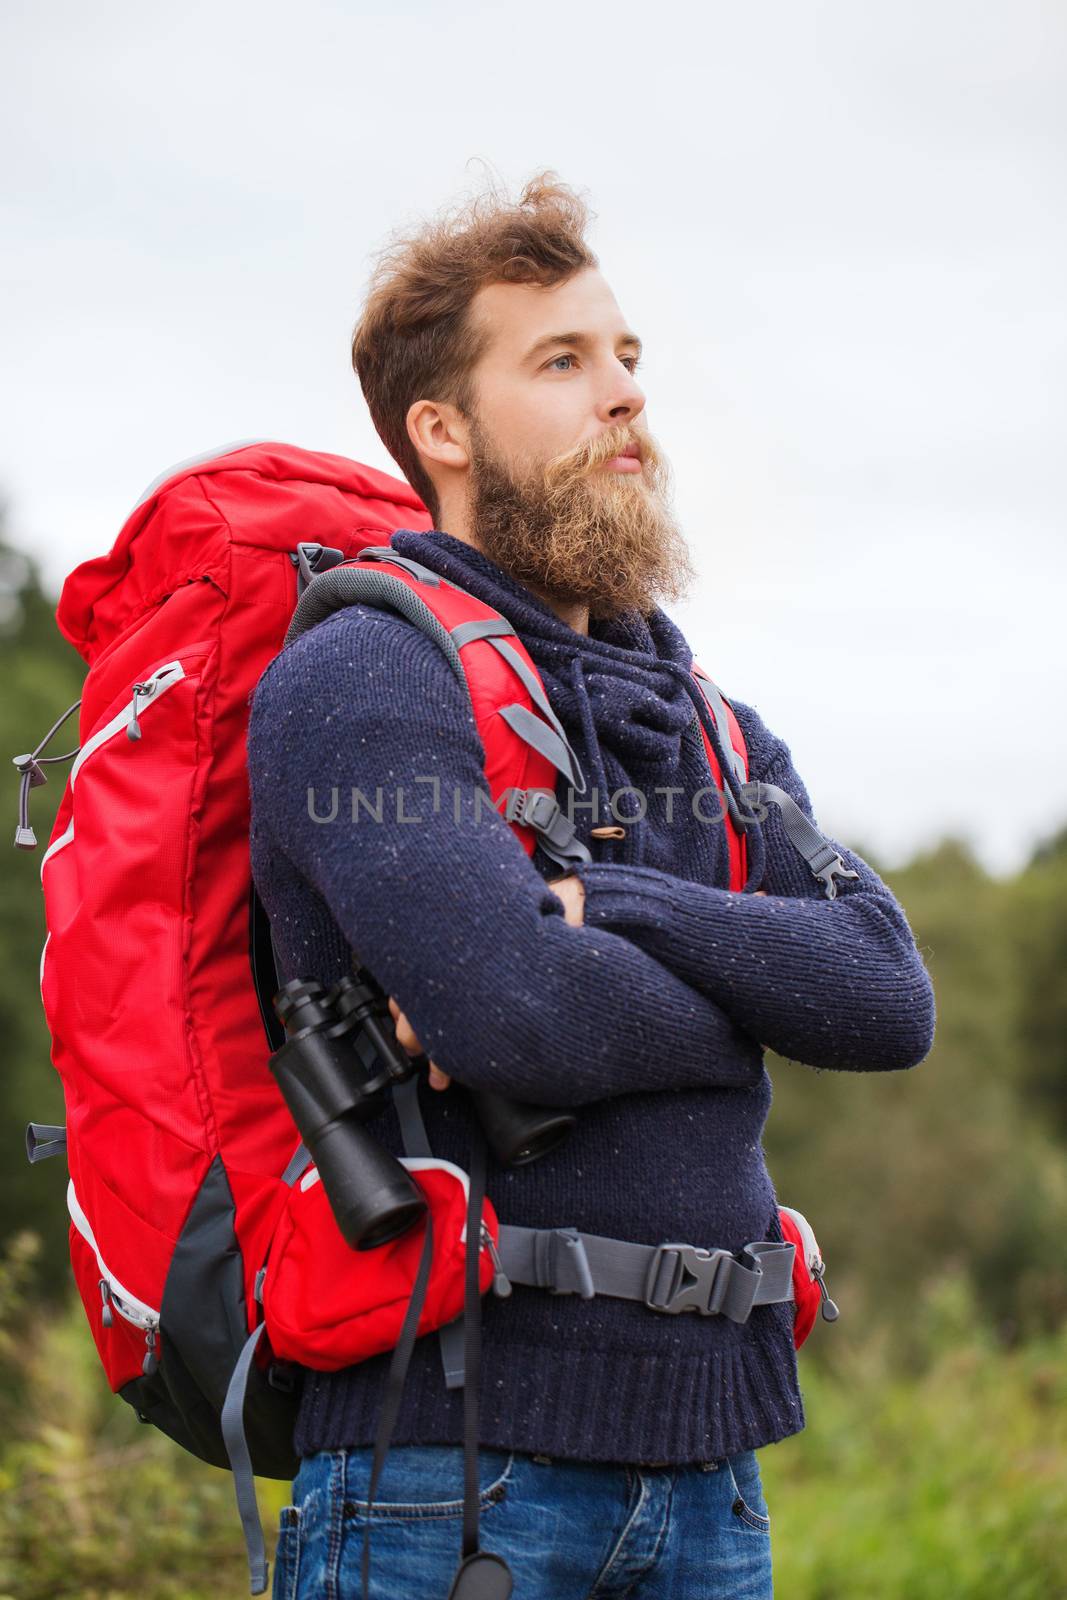 adventure, travel, tourism, hike and people concept - man with red backpack and binocular outdoors